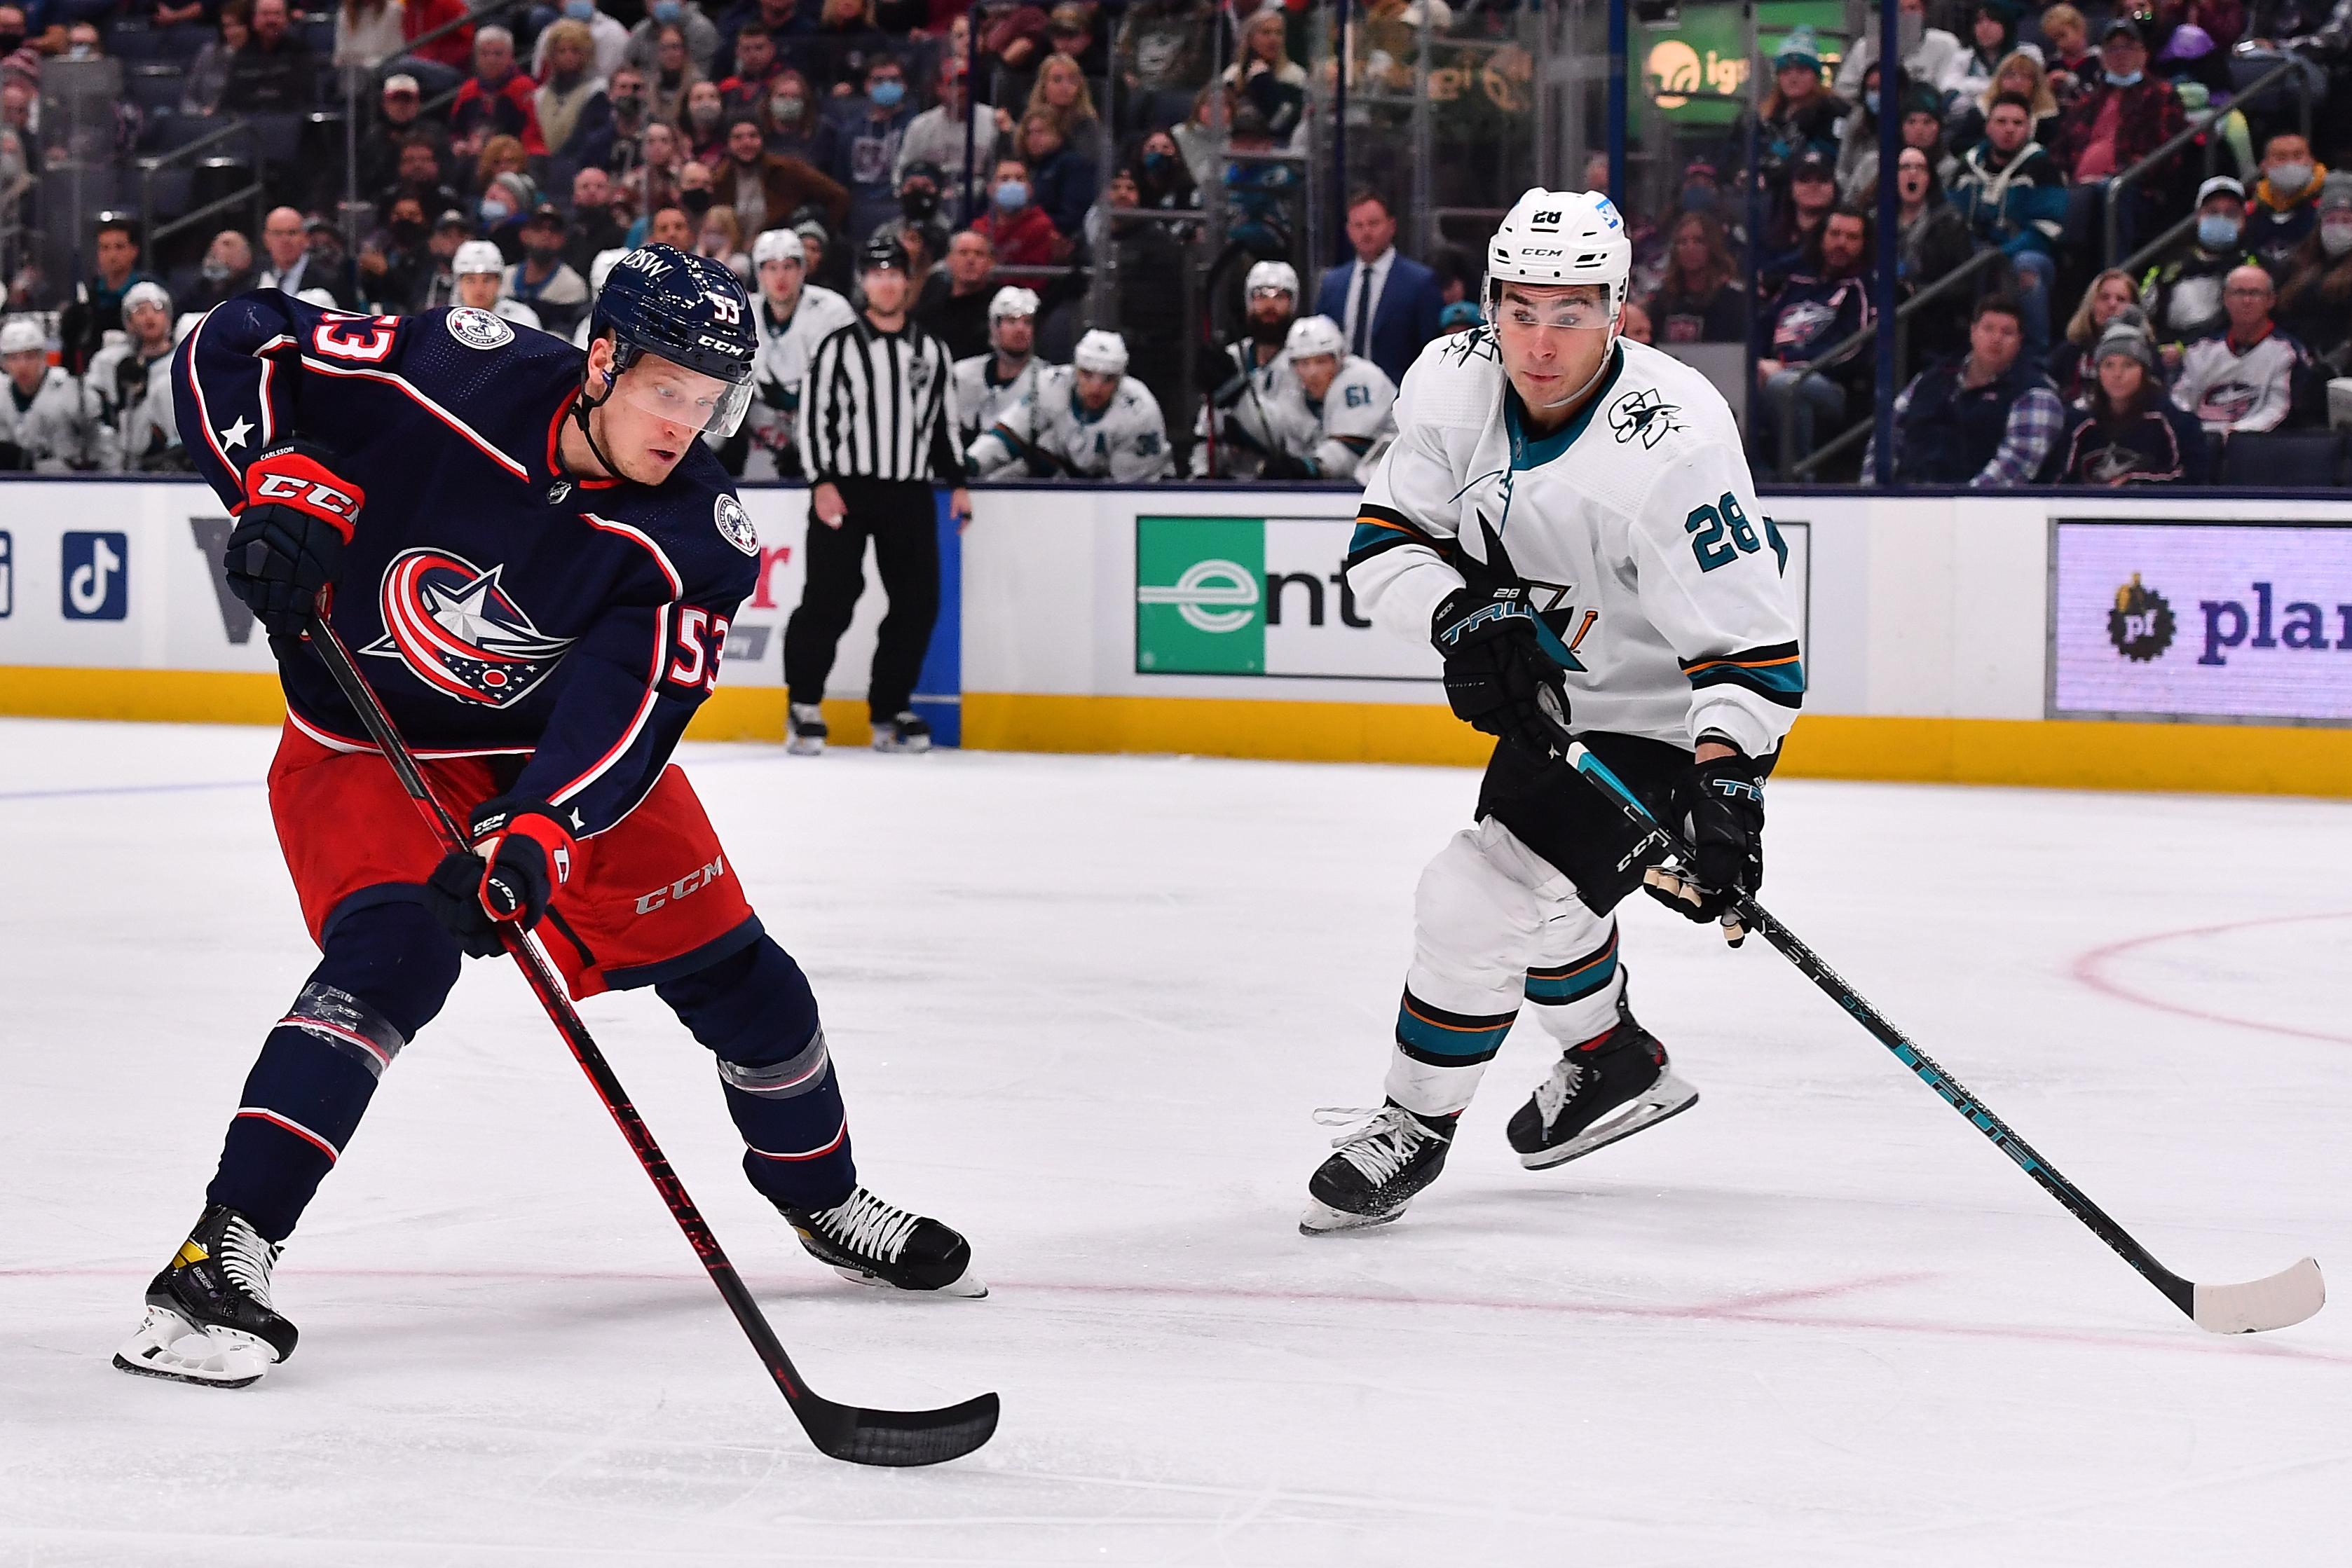 Gabriel Carlsson #53 of the Columbus Blue Jackets skates with the puck as Timo Meier #28 of the San Jose Sharks defends during the third period of a game at Nationwide Arena on December 5, 2021 in Columbus, Ohio.